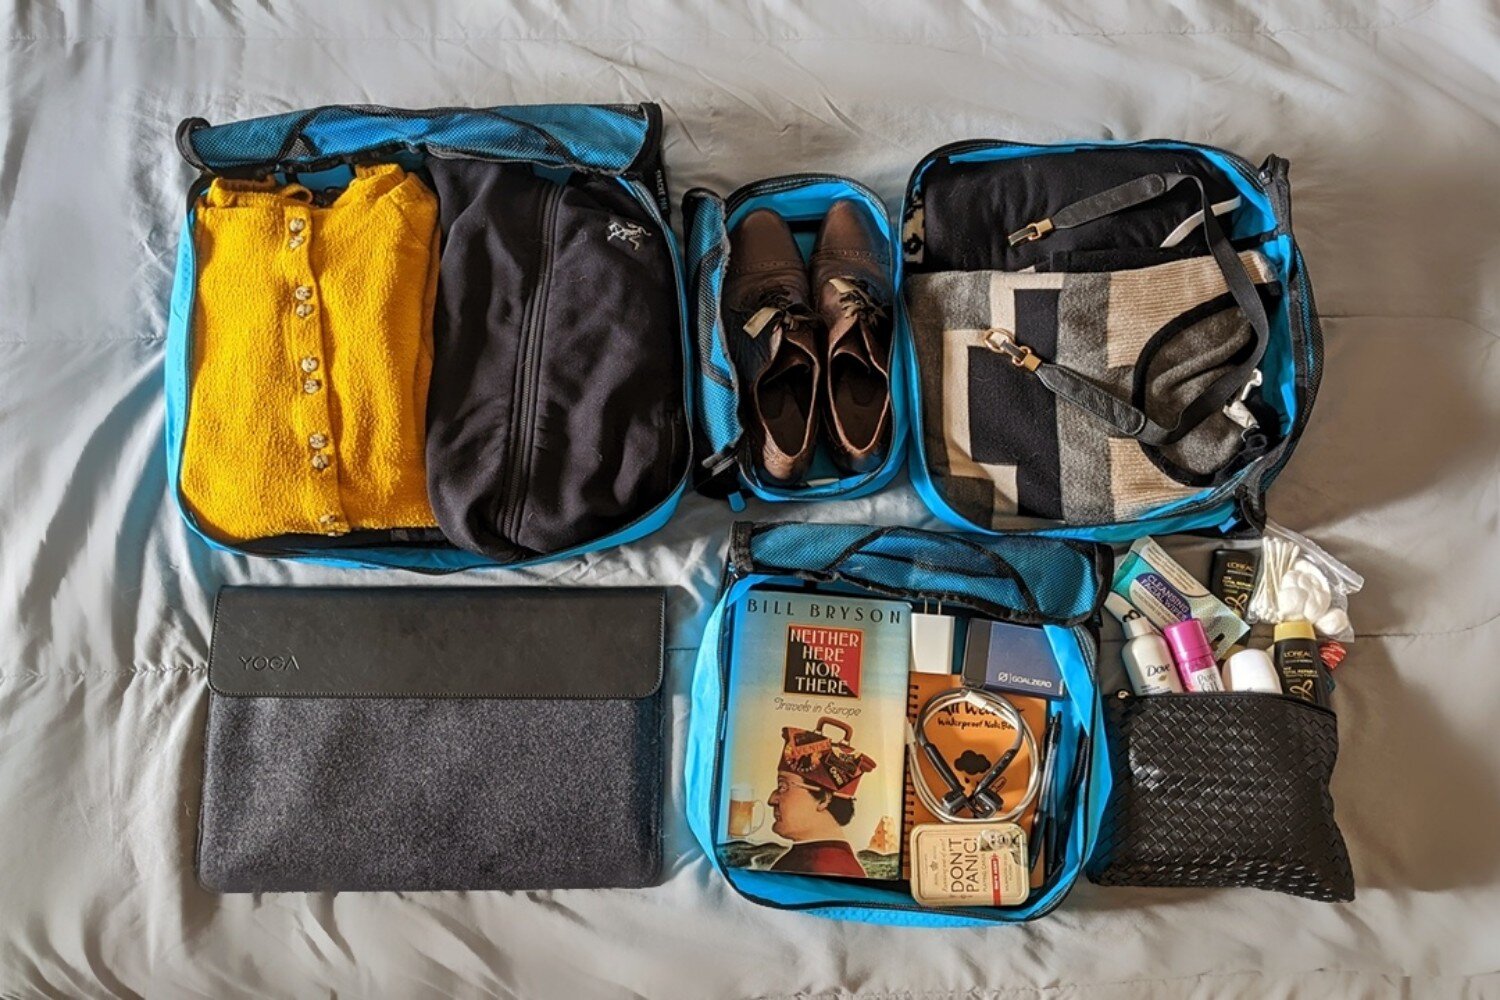 Packing cubes help keep your things organized in your bag.